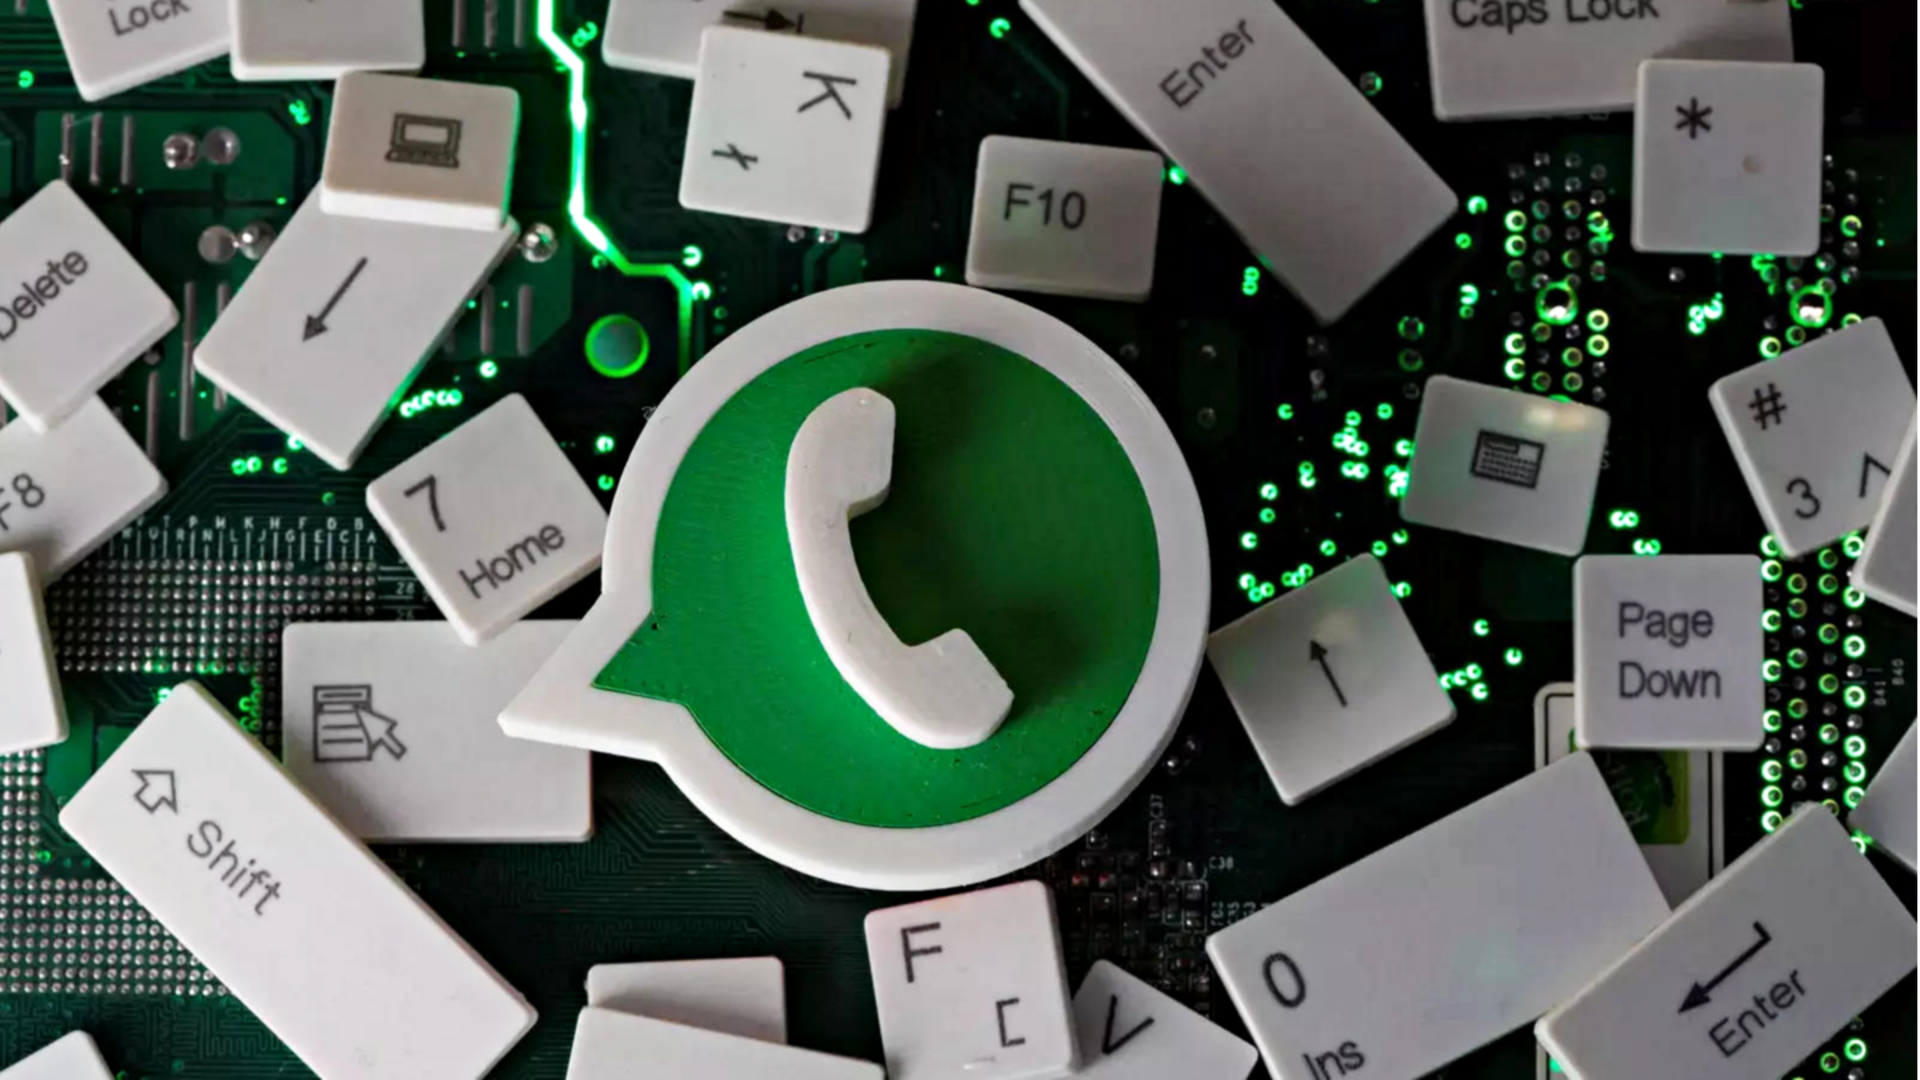 Upcoming WhatsApp features: Voice status, Chat for desktop, Calls tab